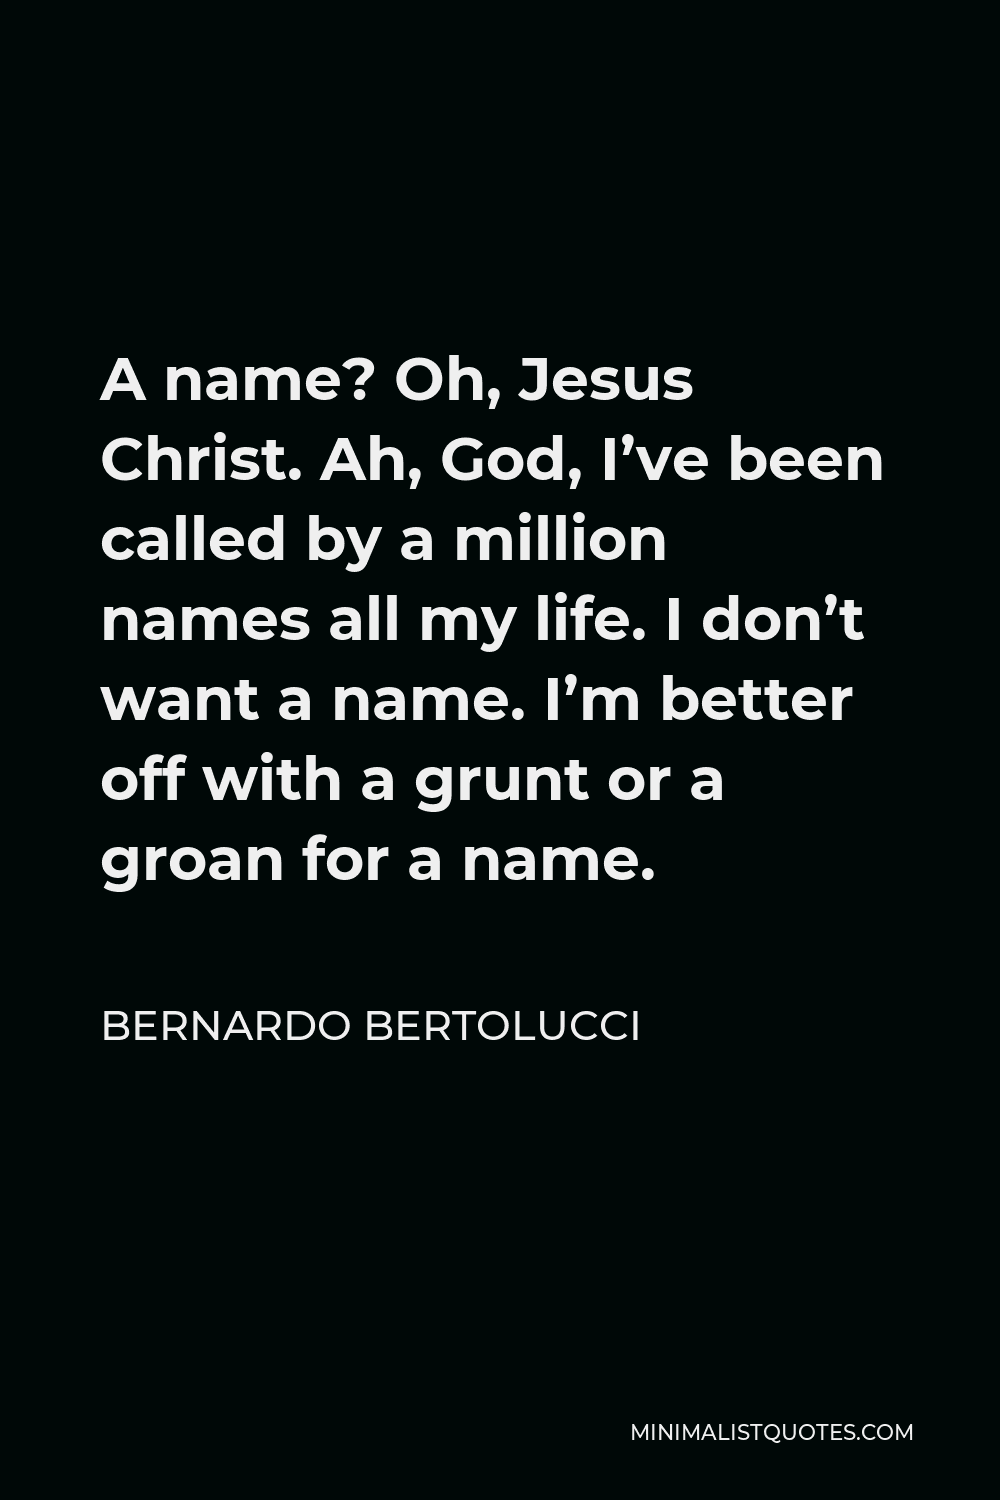 Bernardo Bertolucci Quote - A name? Oh, Jesus Christ. Ah, God, I’ve been called by a million names all my life. I don’t want a name. I’m better off with a grunt or a groan for a name.